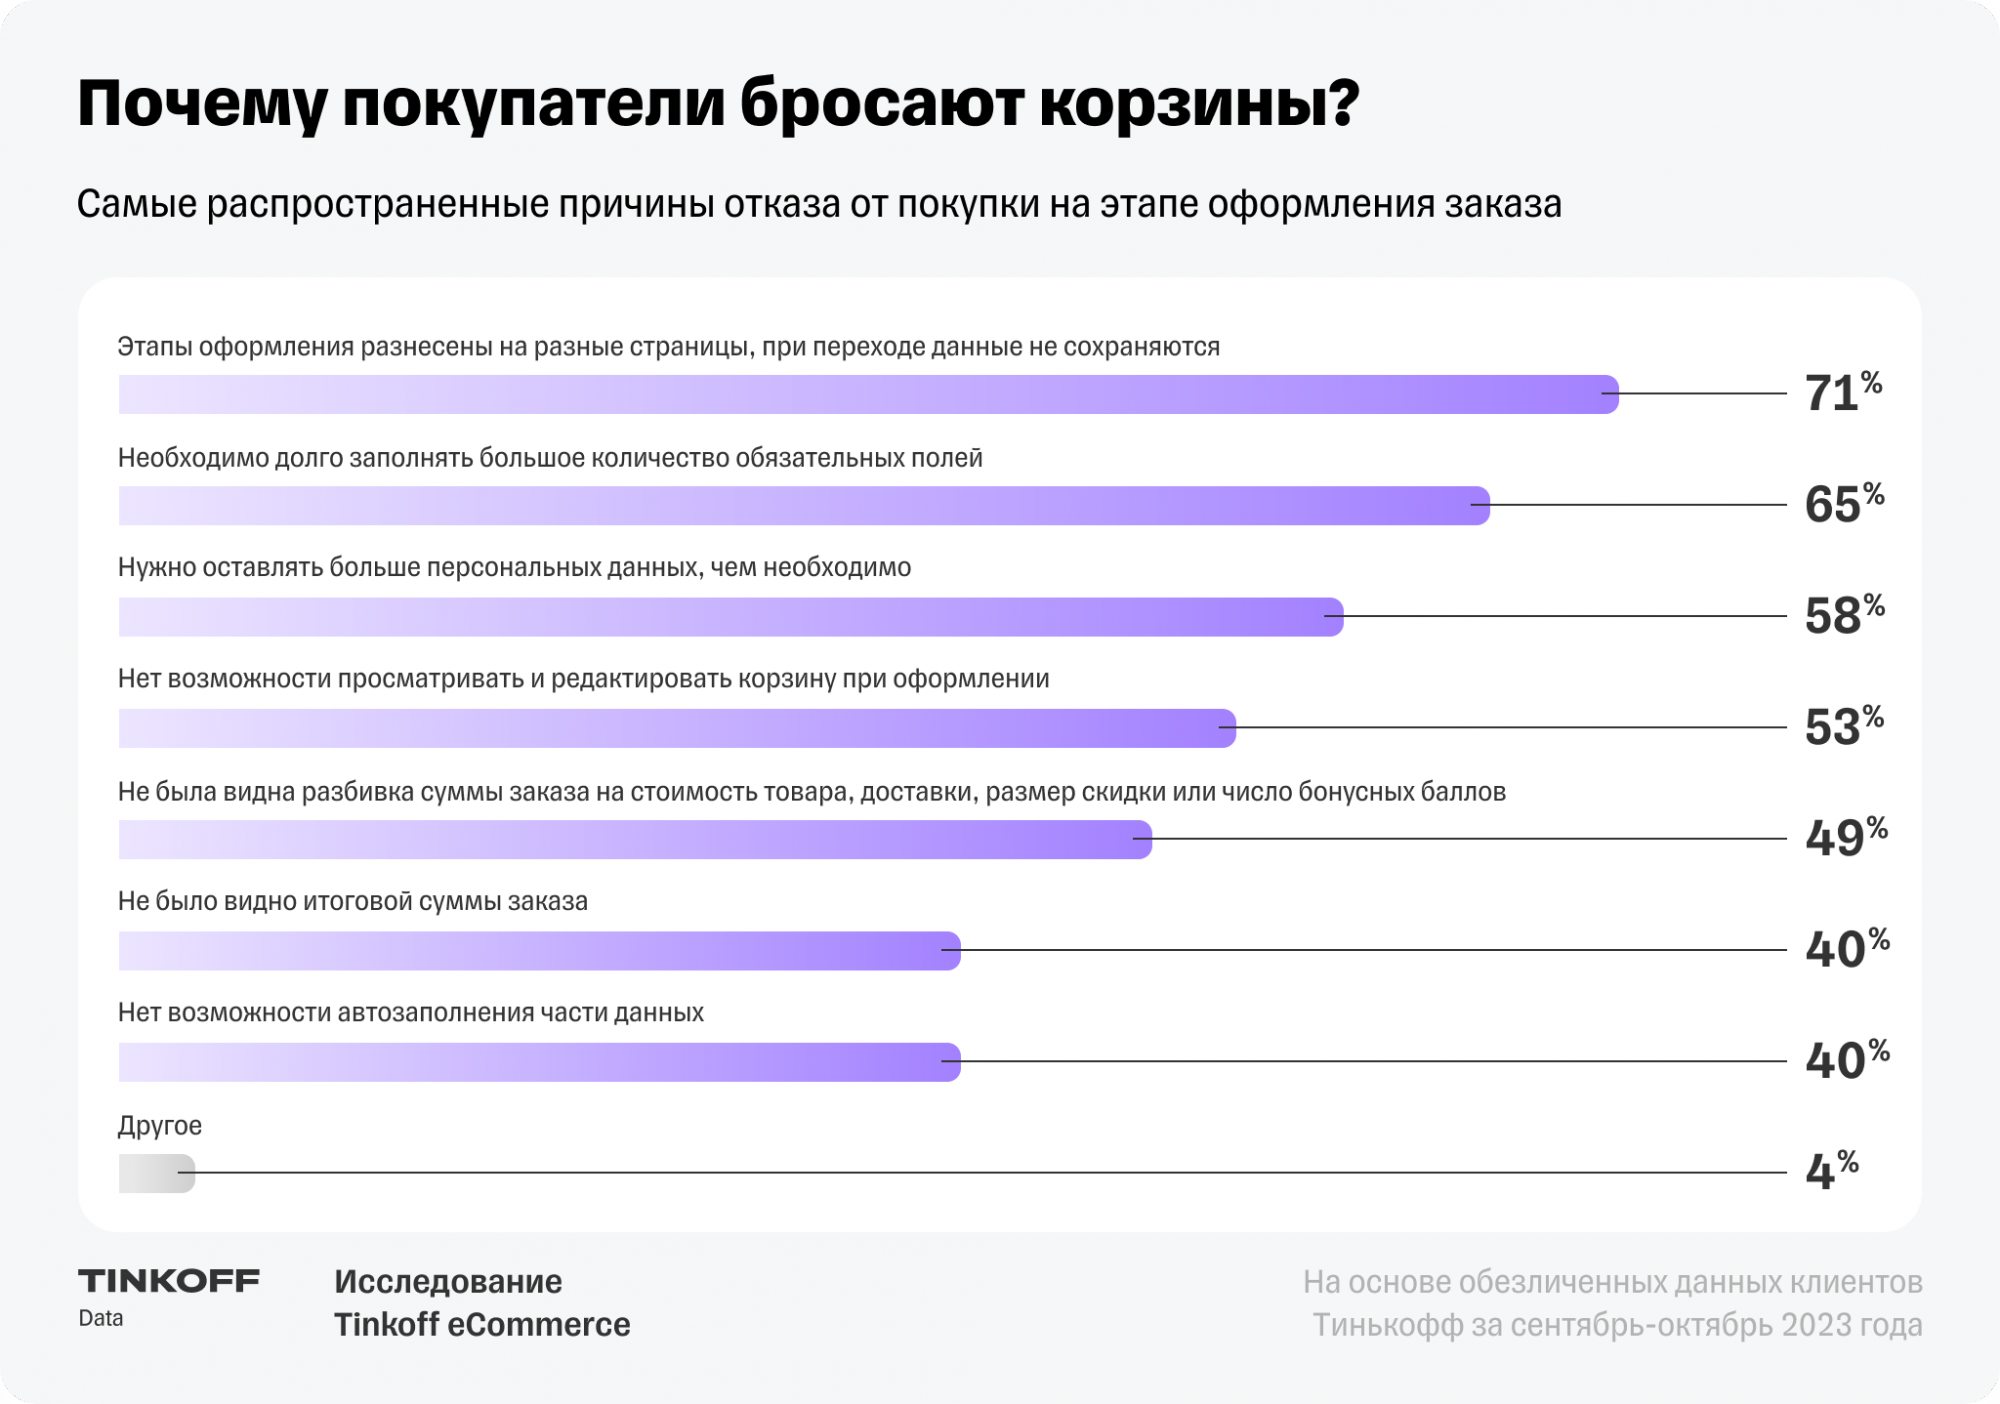 28112023-tinkoff-ecommerce-research-70percent-of-carts-remain-unpaid-in-russian-online-stores-2.png